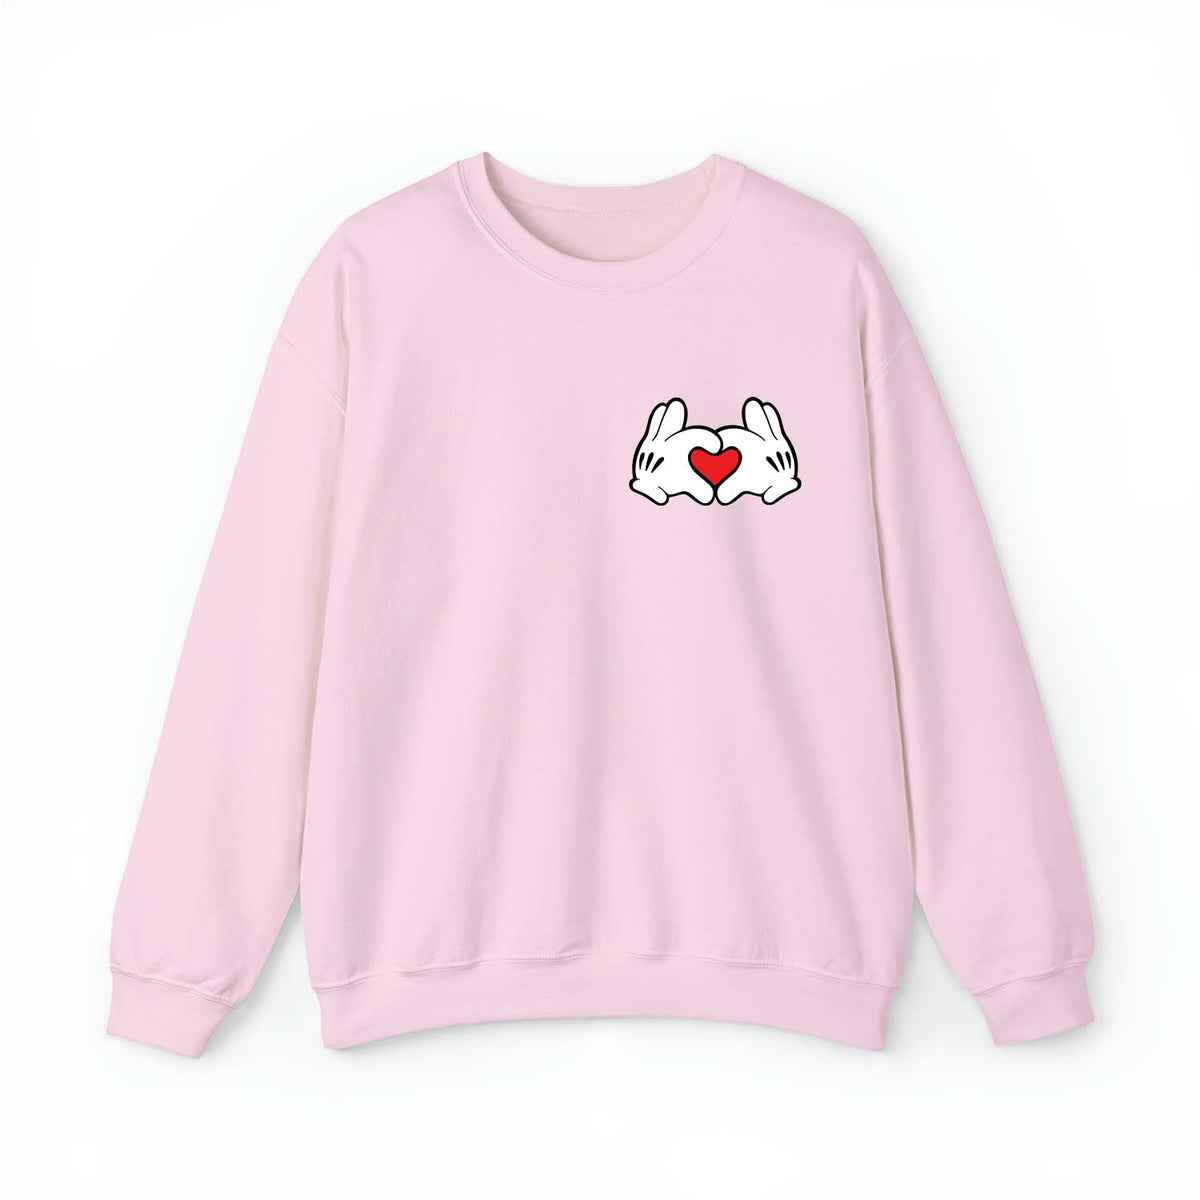 pink-sweatshirt-with-pocket-size-mickey-sign-heart